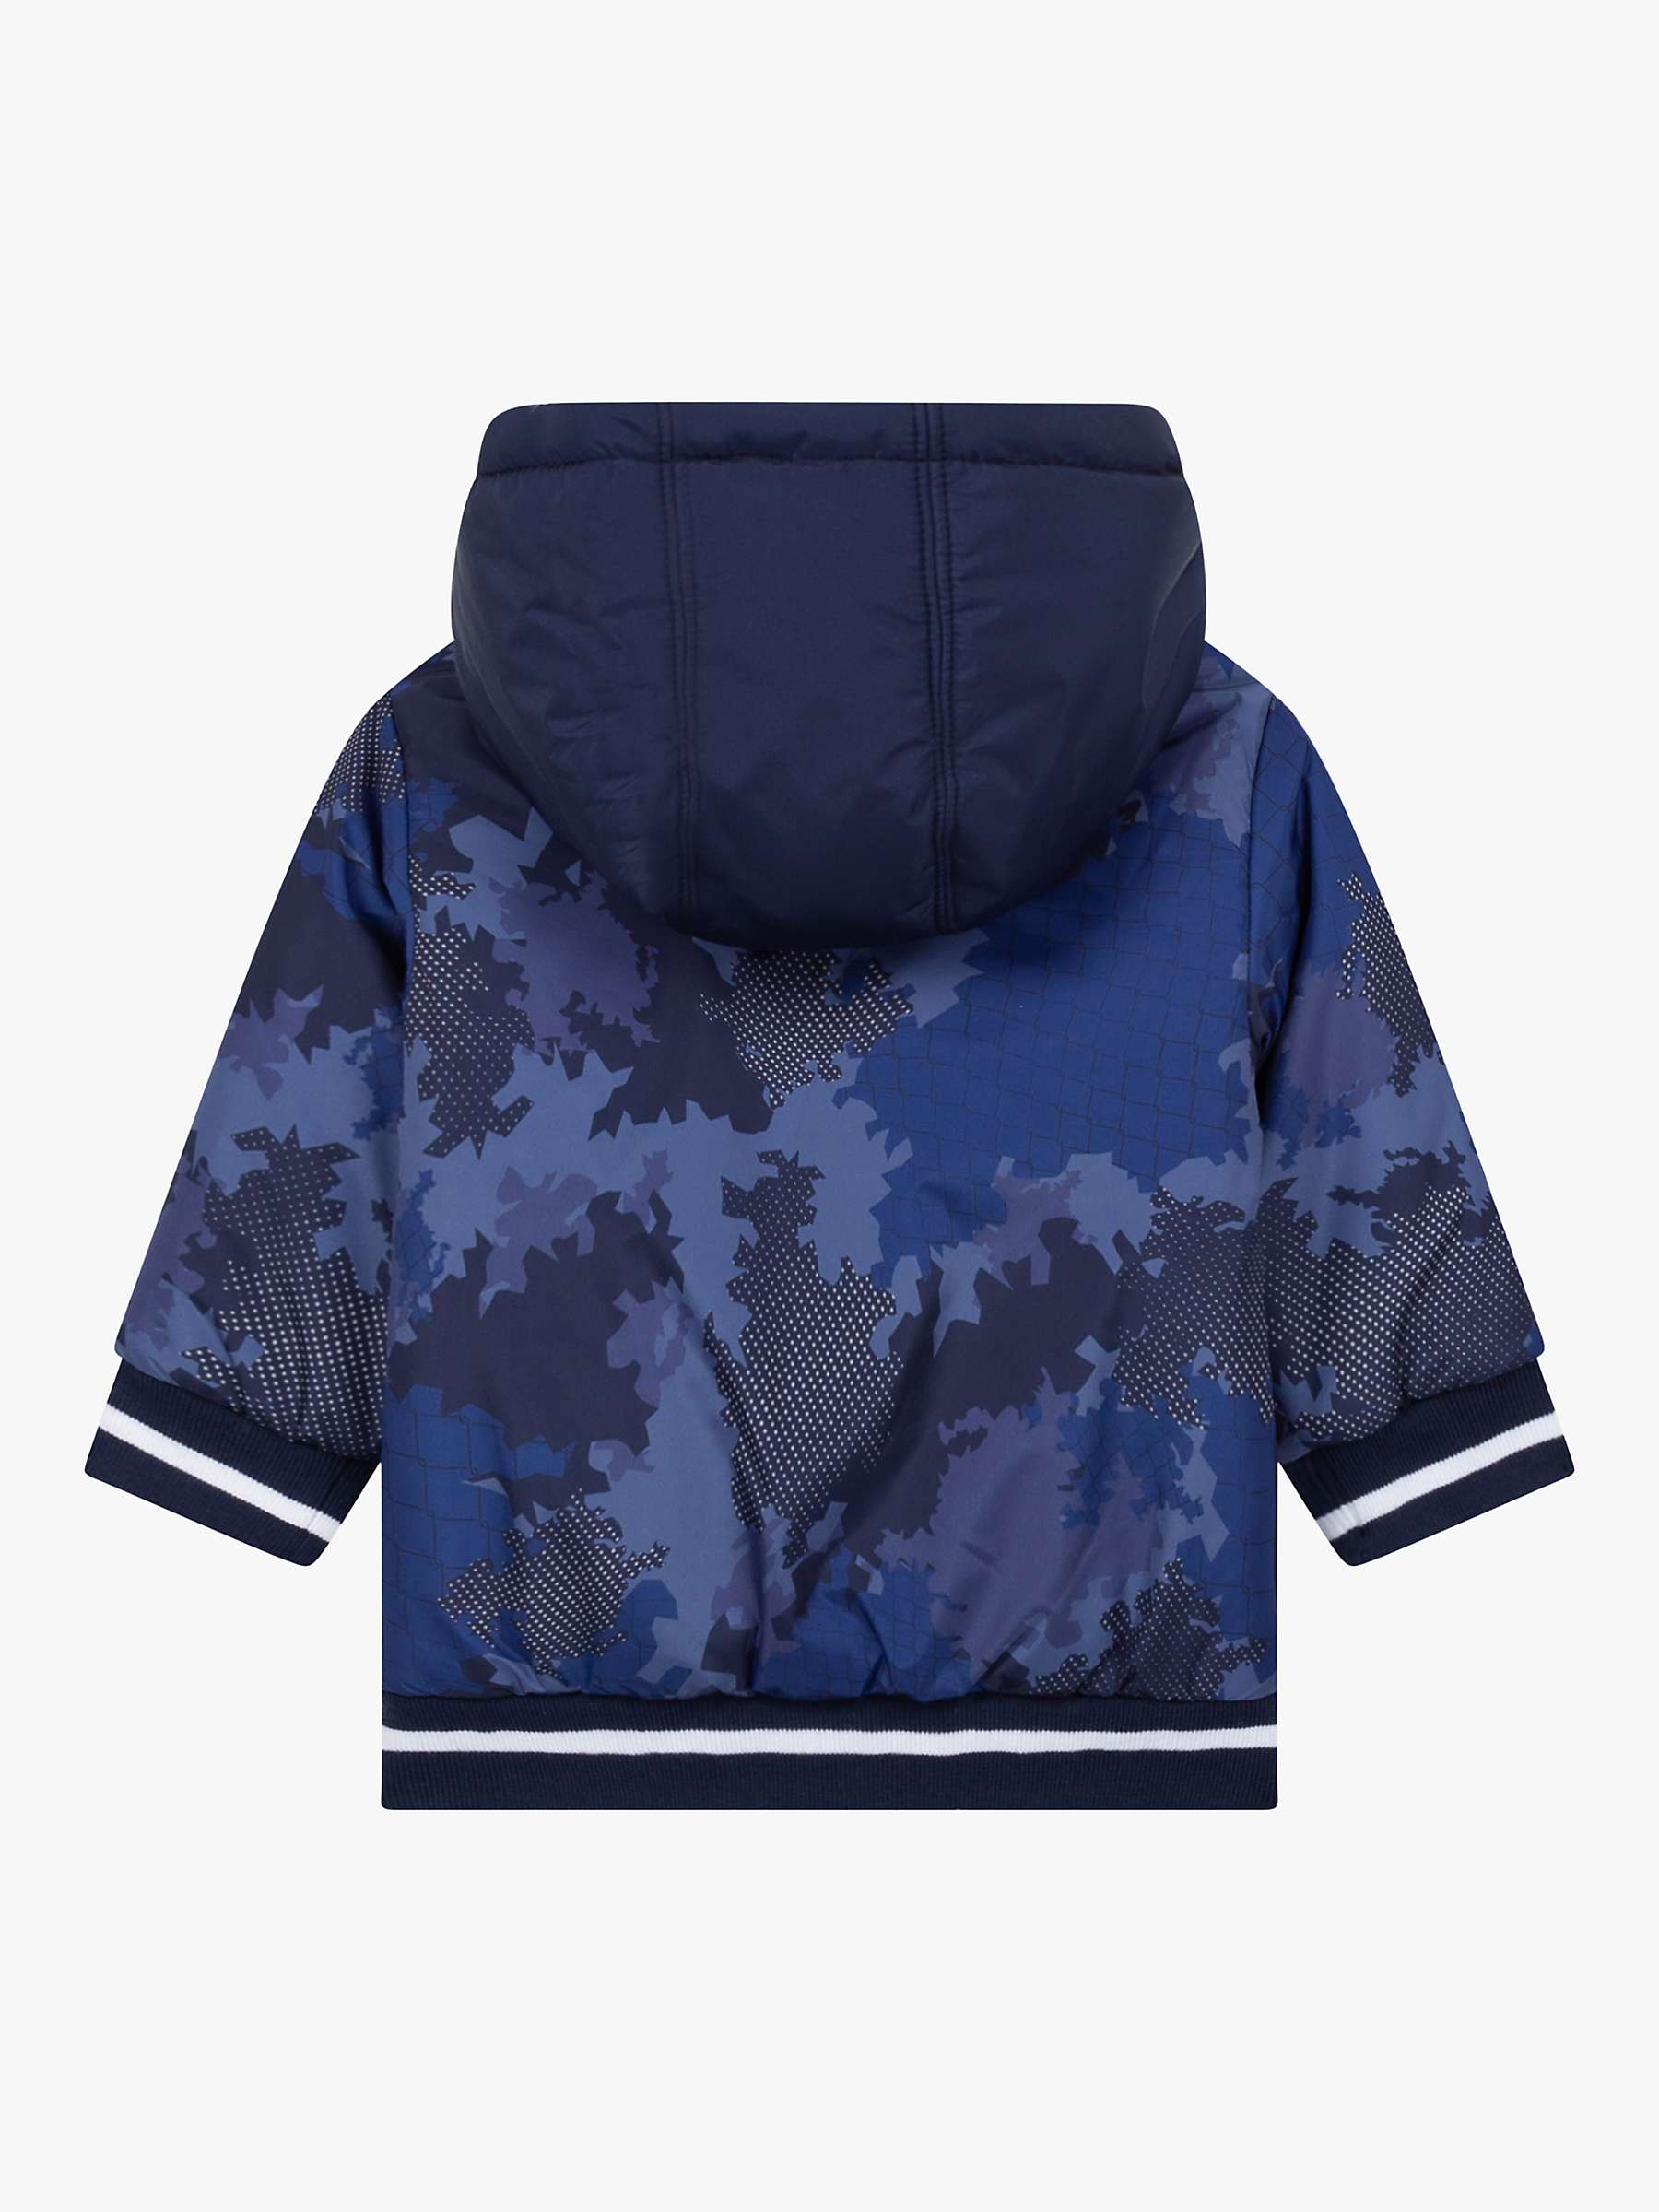 Buy Timberland Baby Camouflage Print Puffer Jacket, Navy Online at johnlewis.com